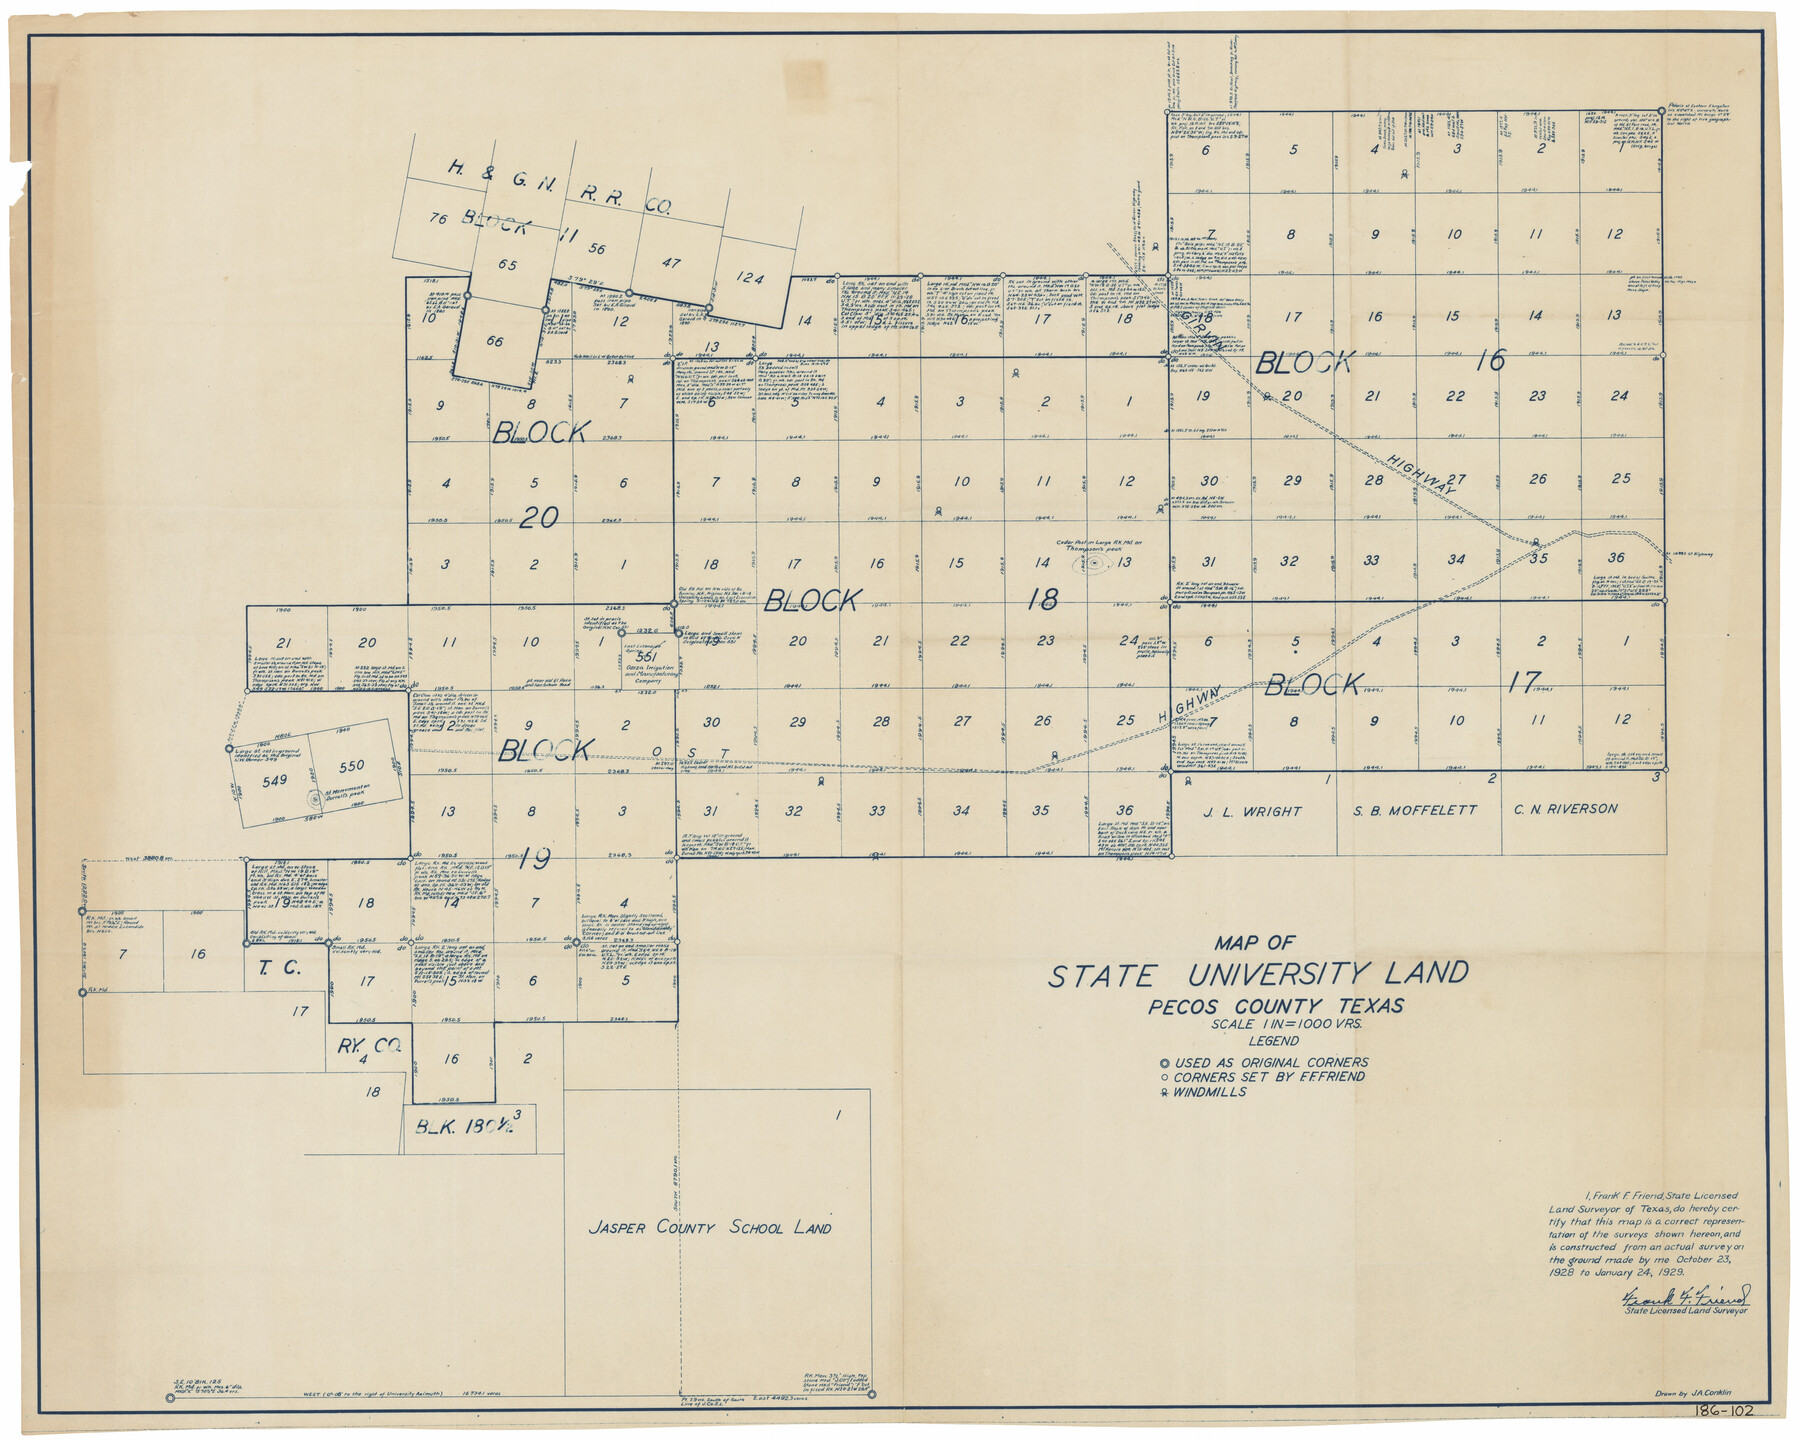 91626, Map of State University Land, Pecos County, Texas, Twichell Survey Records